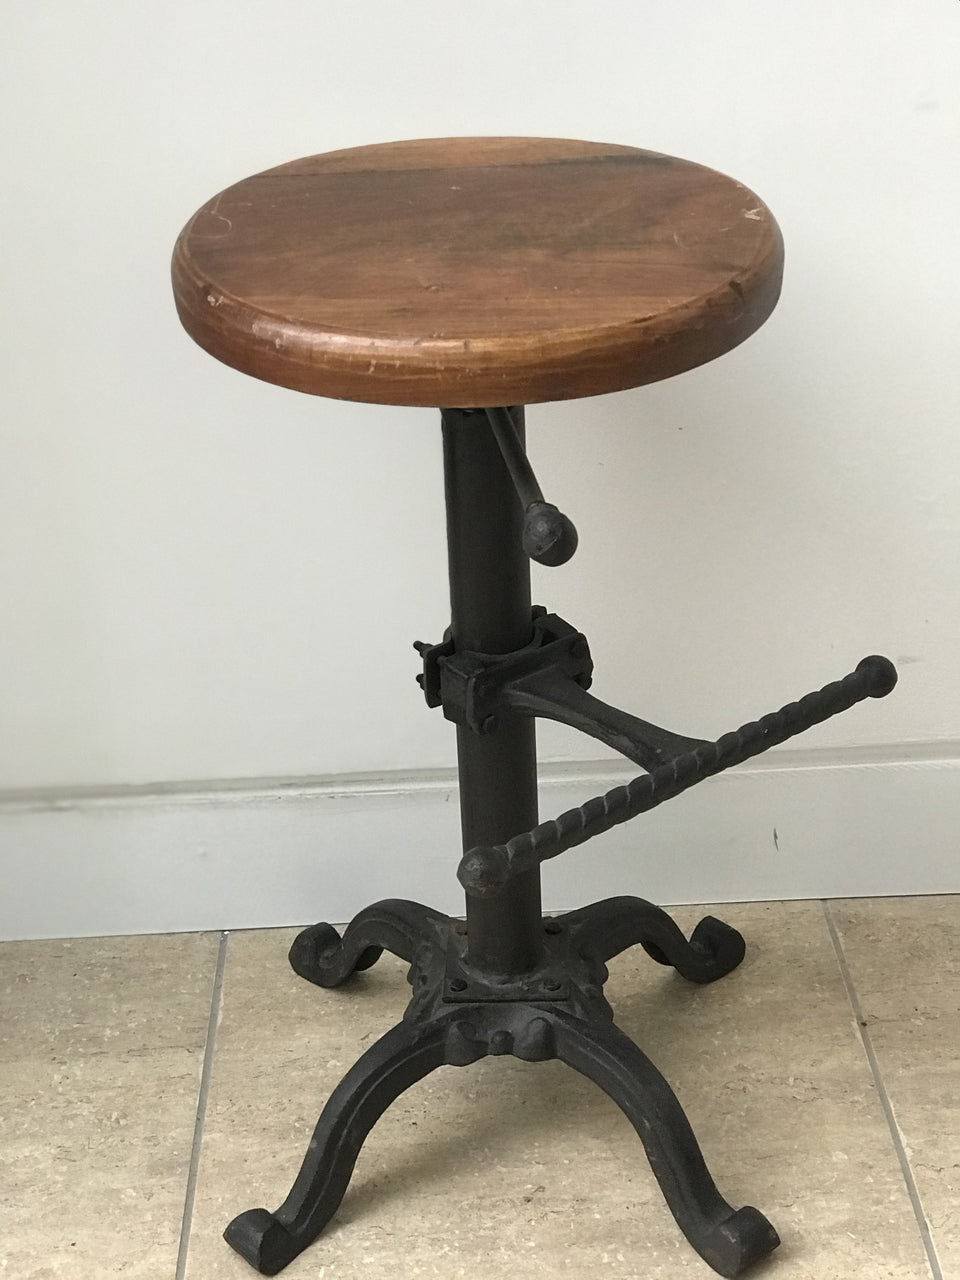 Vintage industrial stool with foot rest